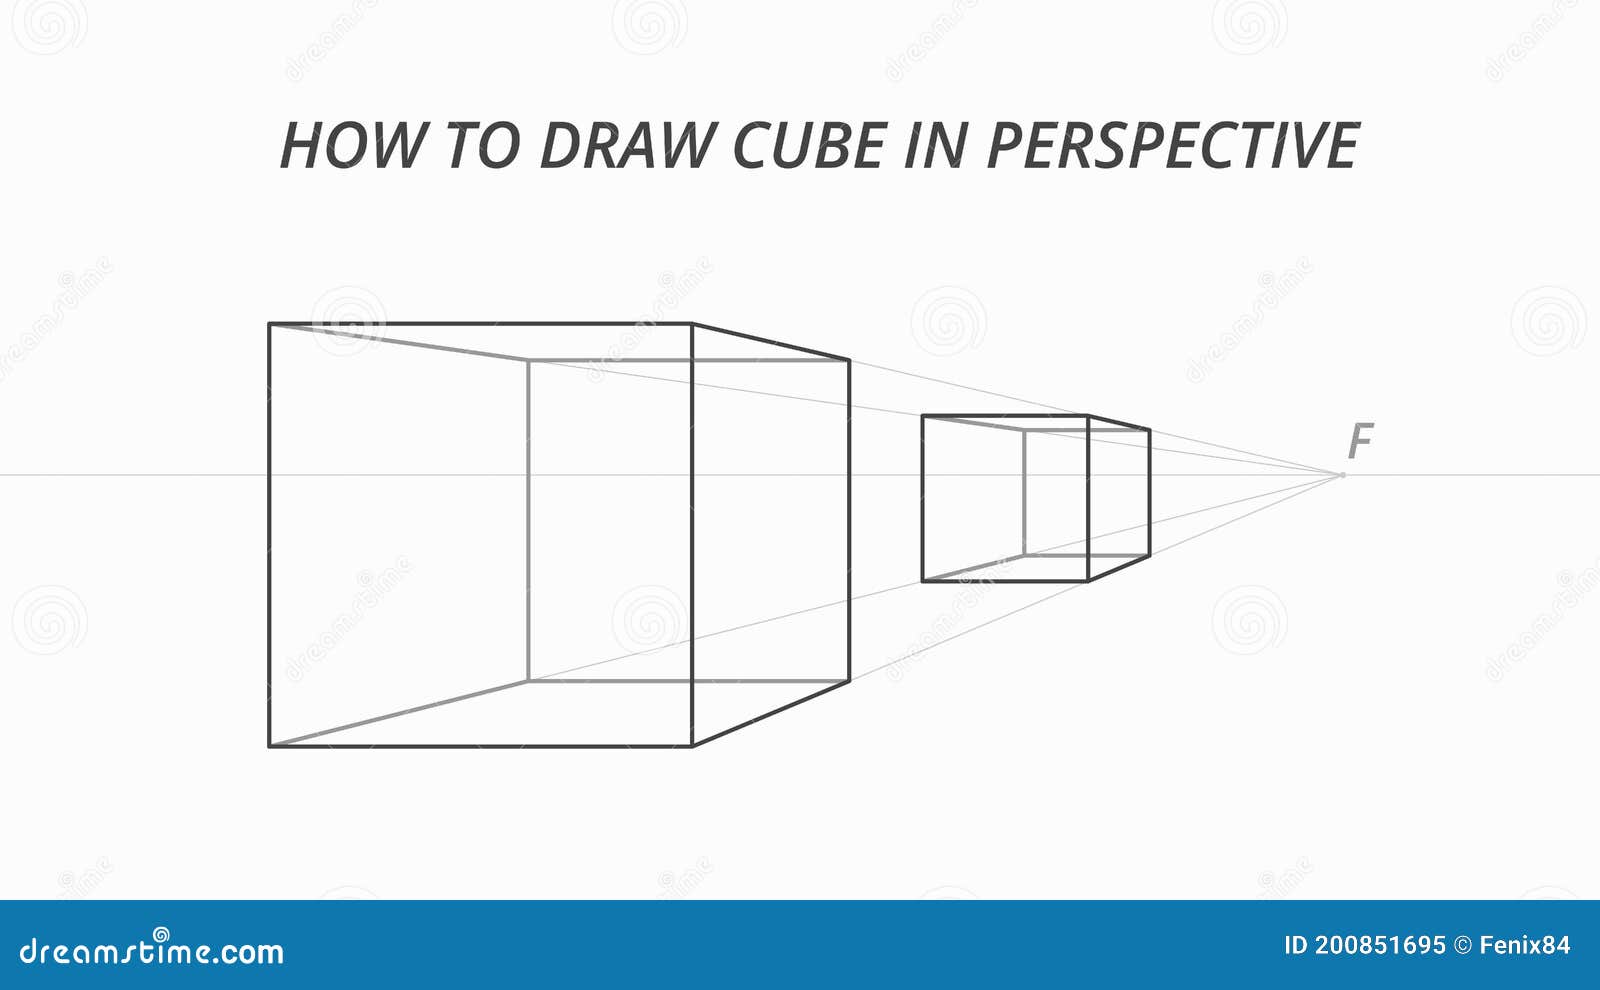 how to draw cube in perspective. 3d cube drawing process